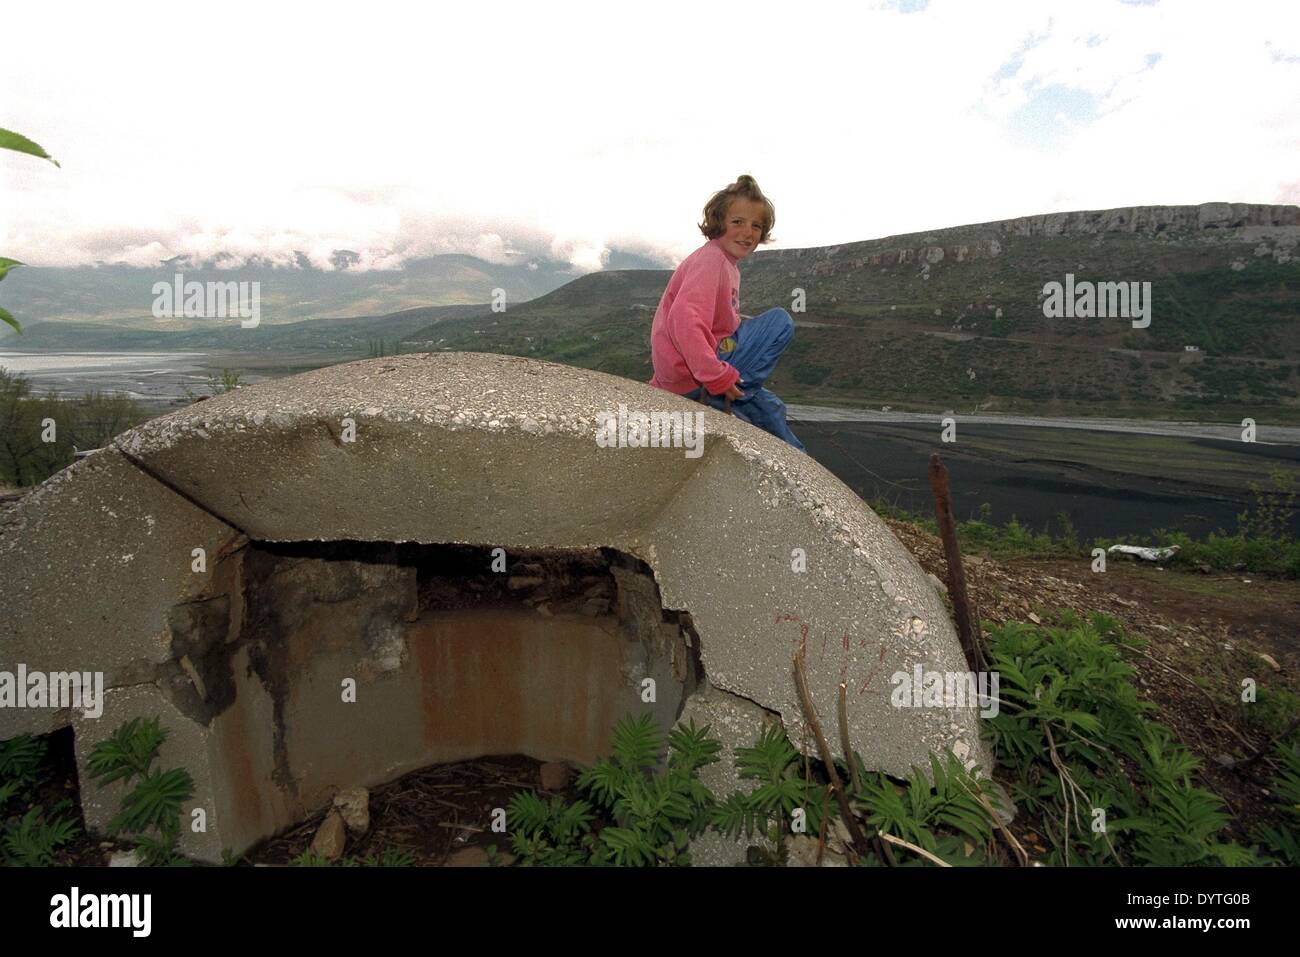 Refugees from Kosovo in Albania (April 1999) Stock Photo